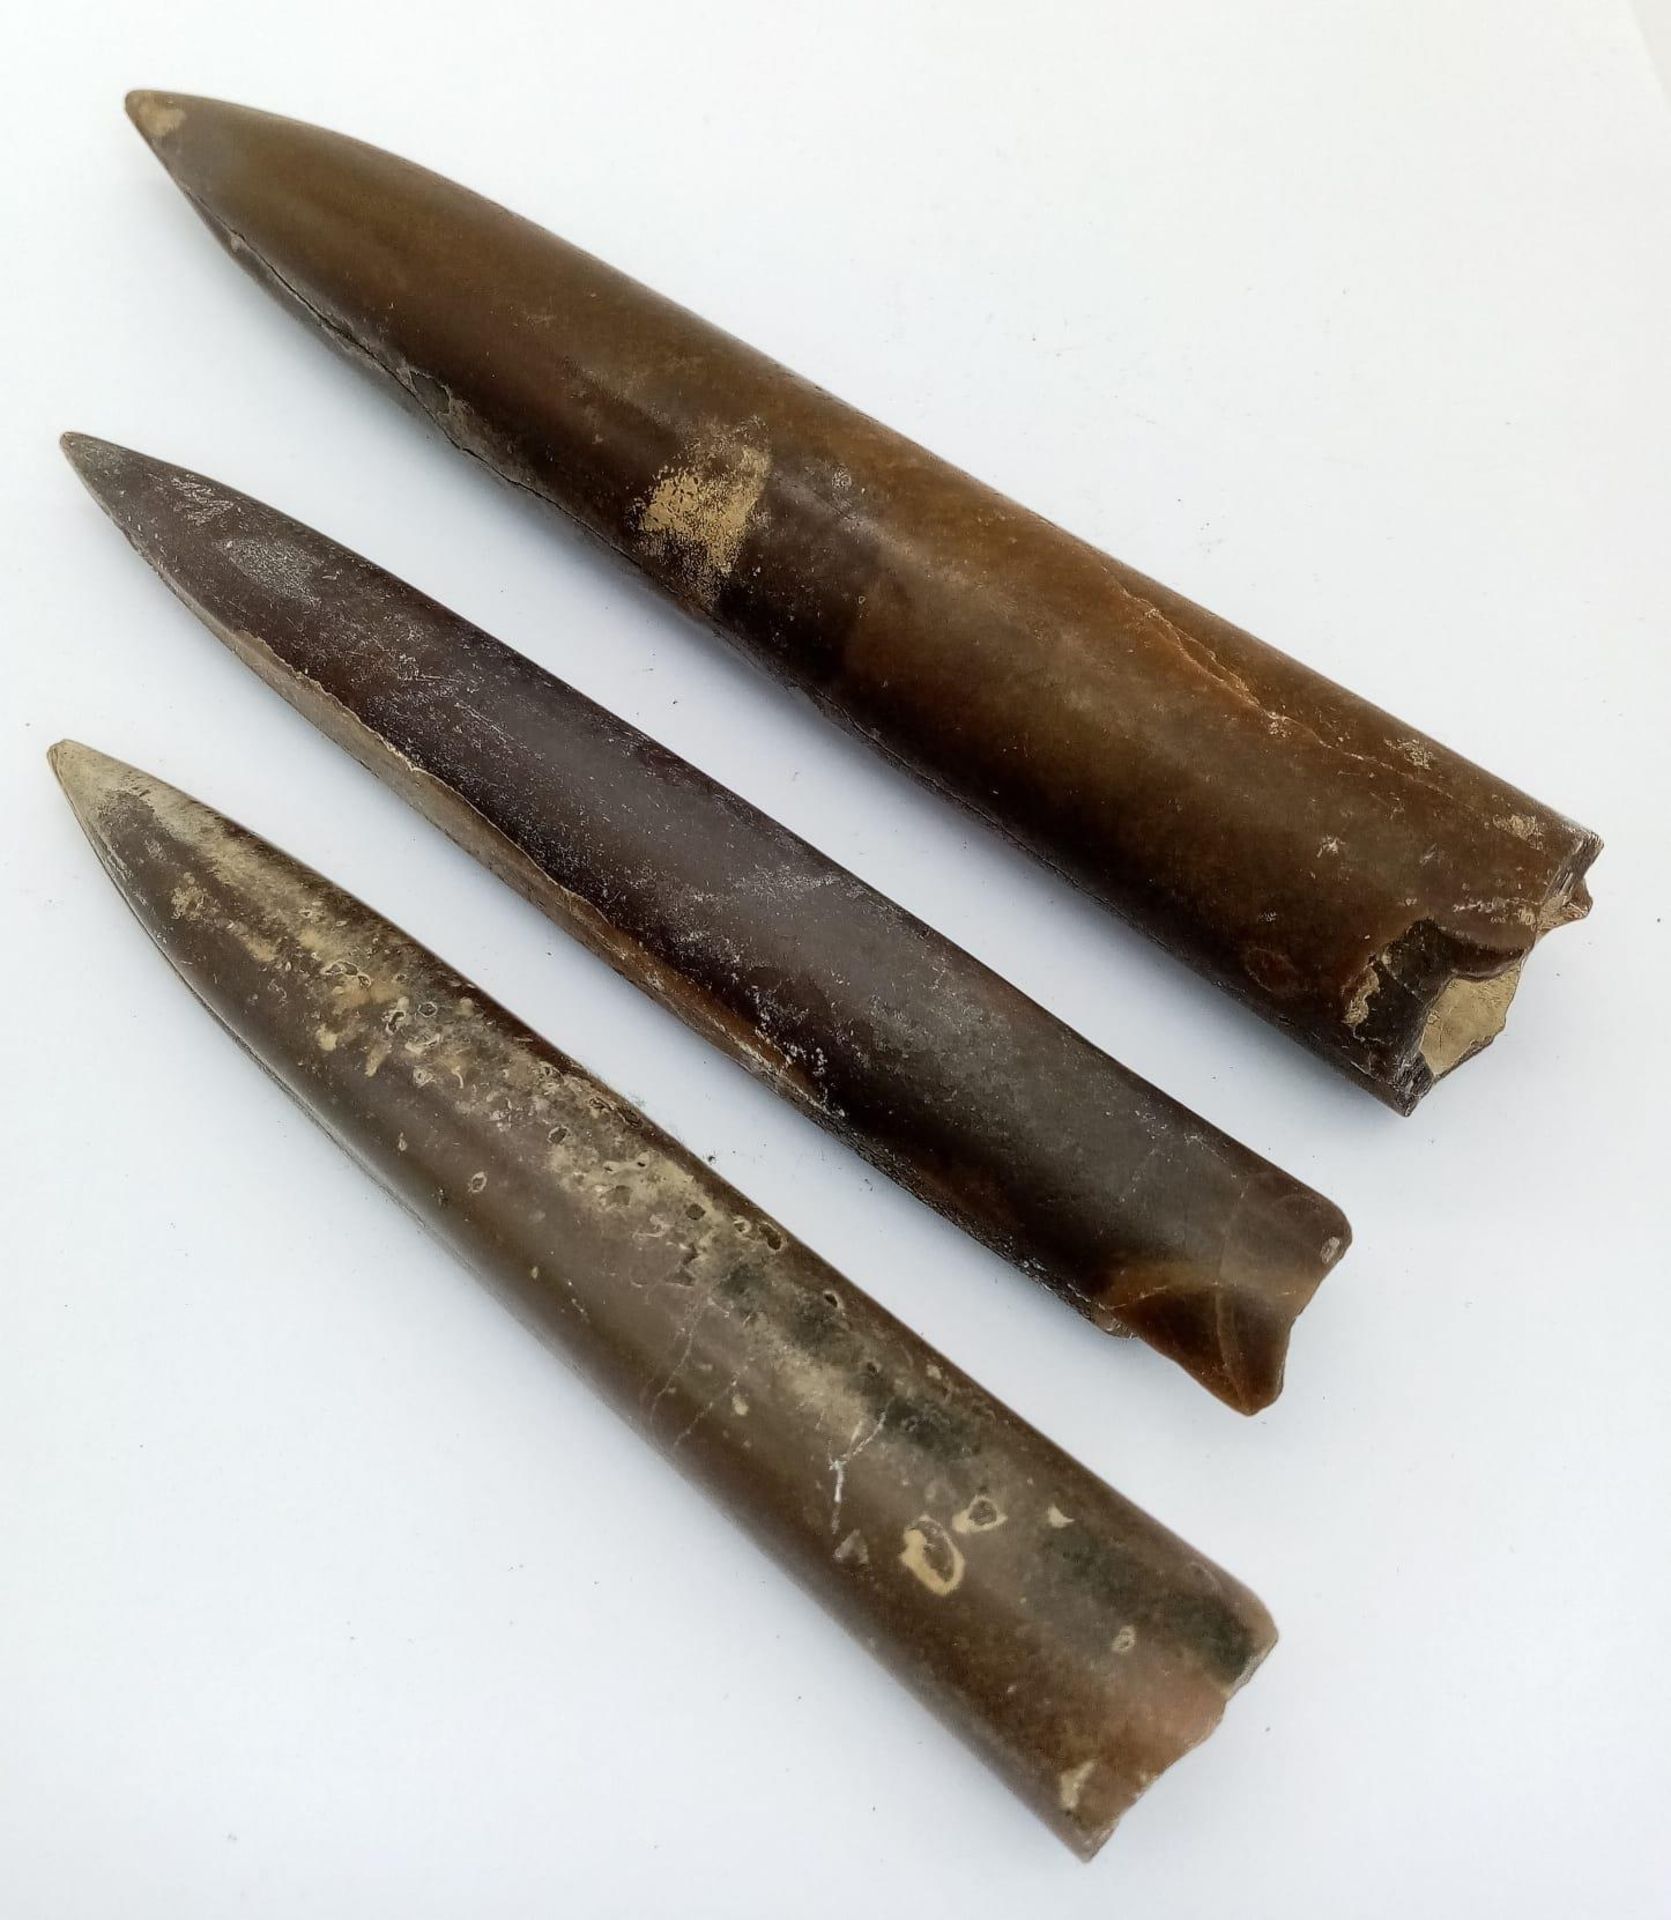 Three fossil Belemnites of the genus Cylindrotheuthis, from Bedfordshire, UK. Of Callovian-